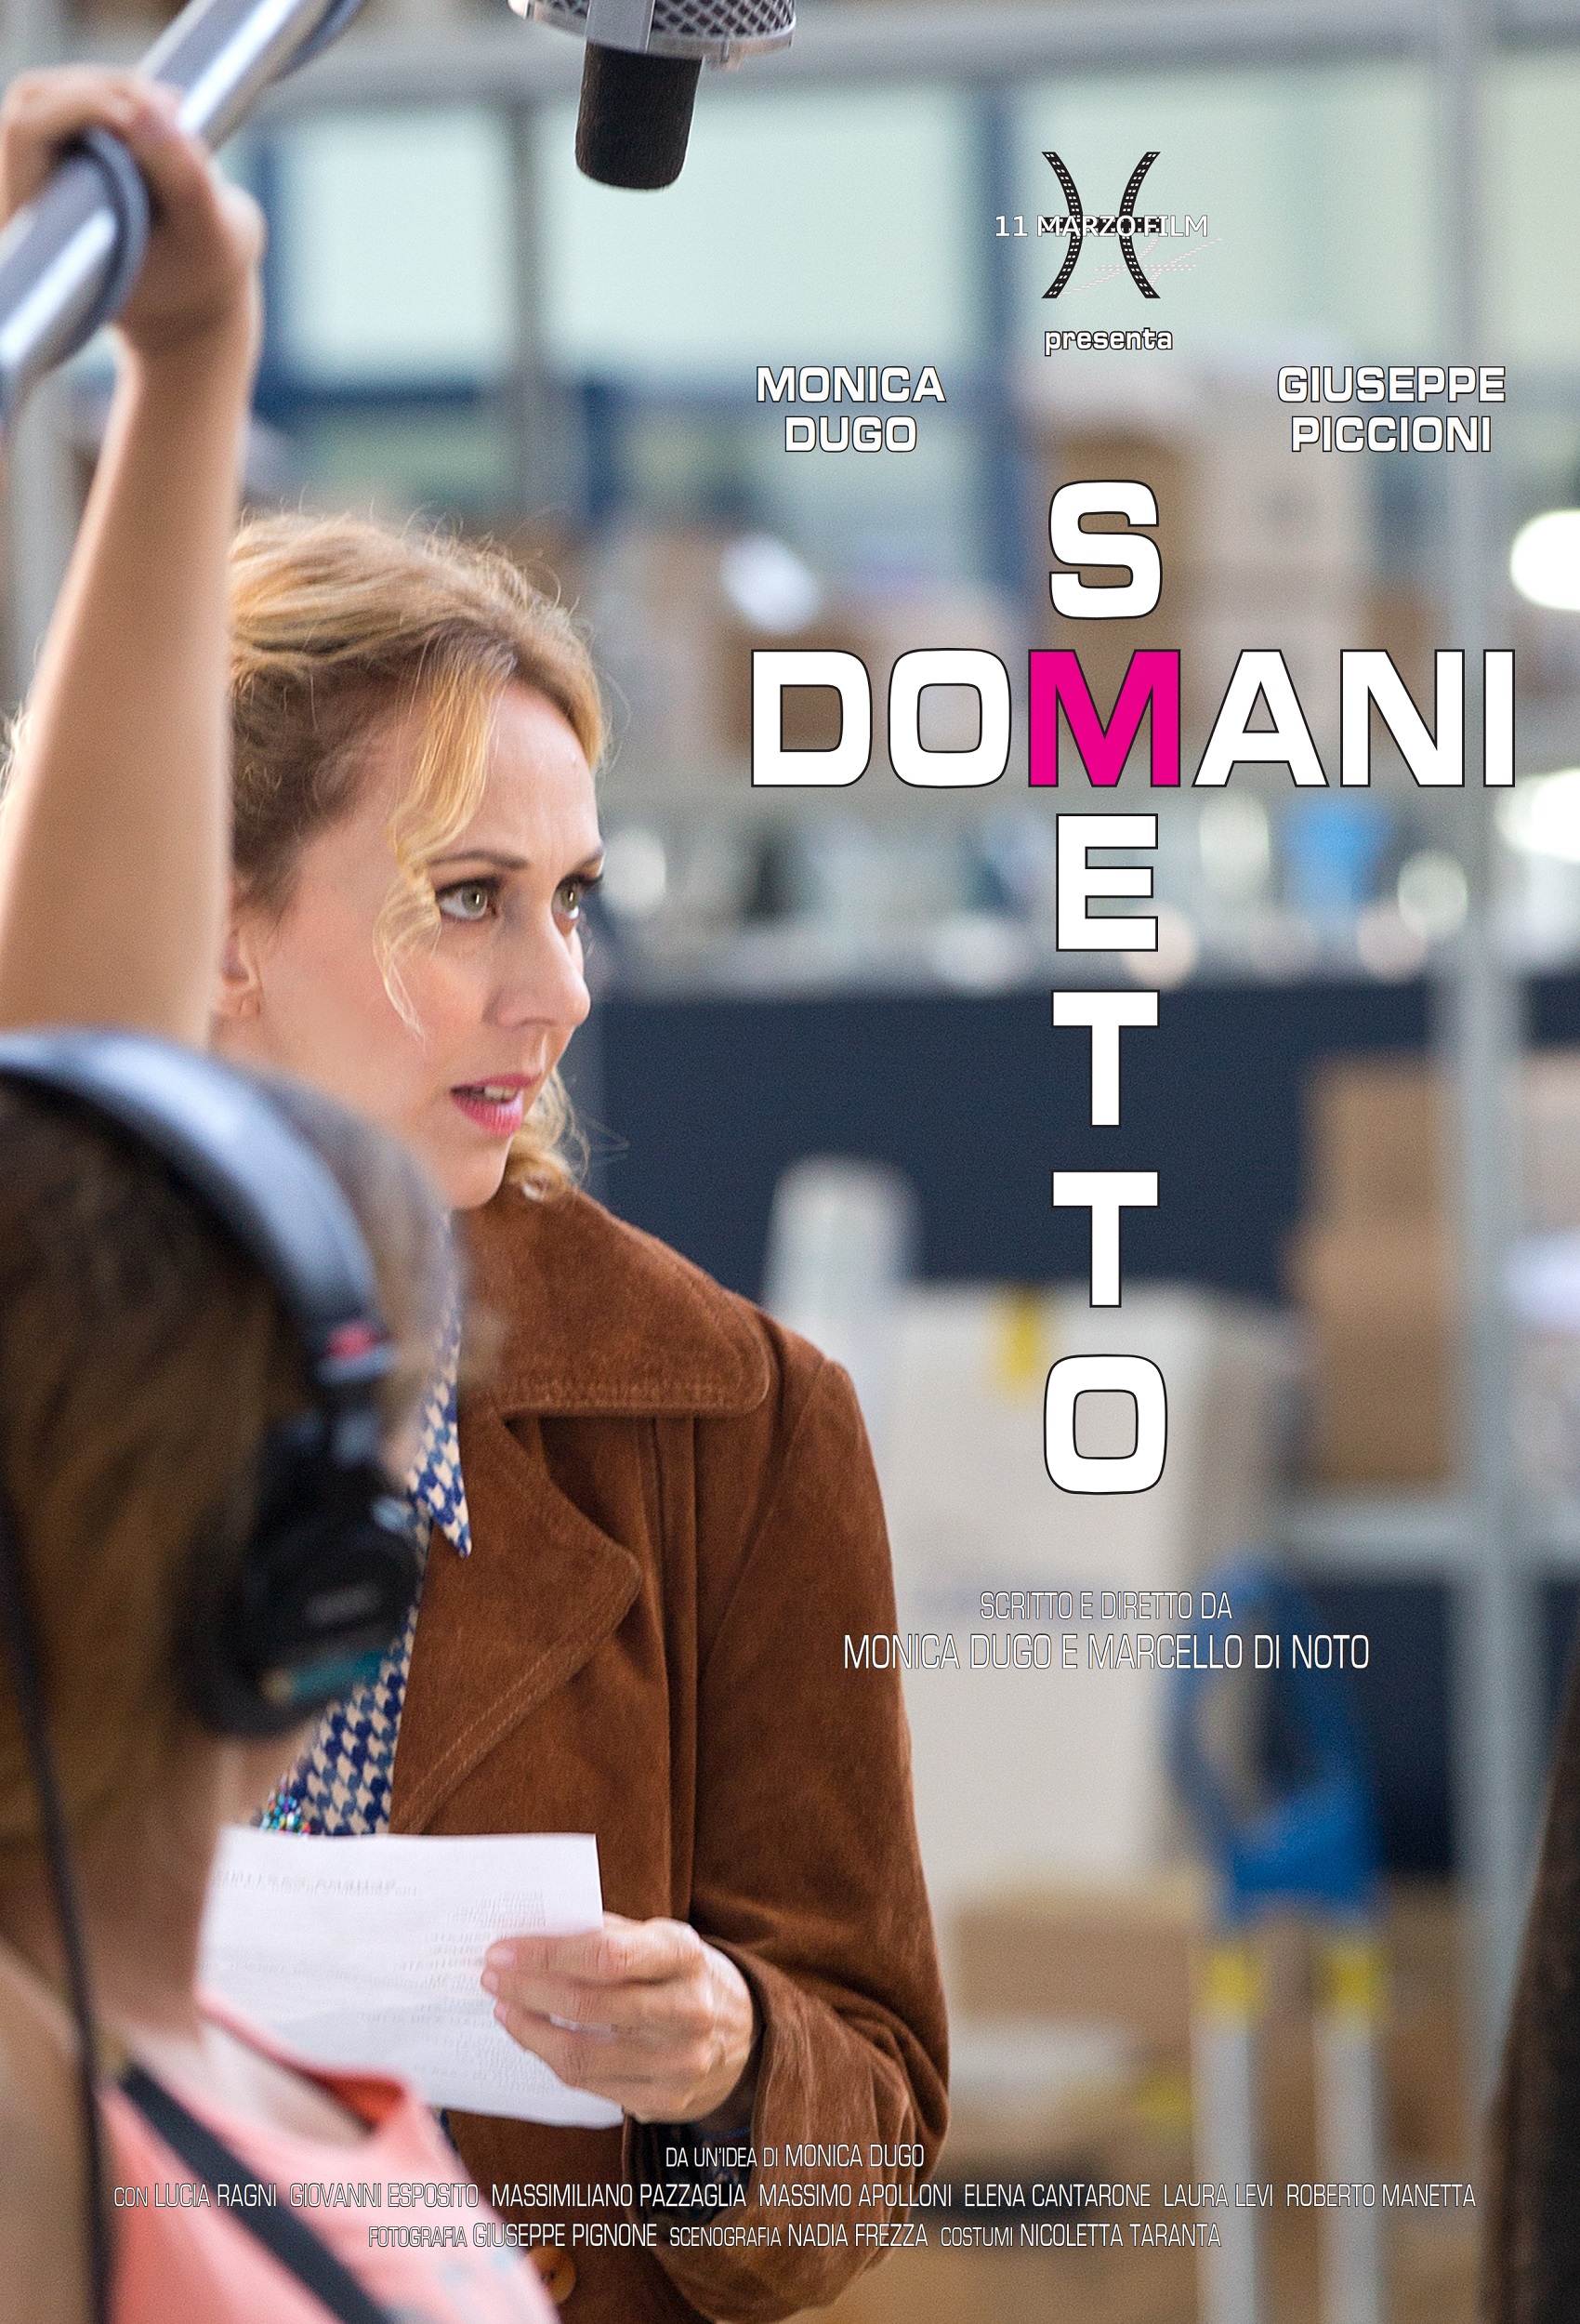 You are currently viewing Domani smetto